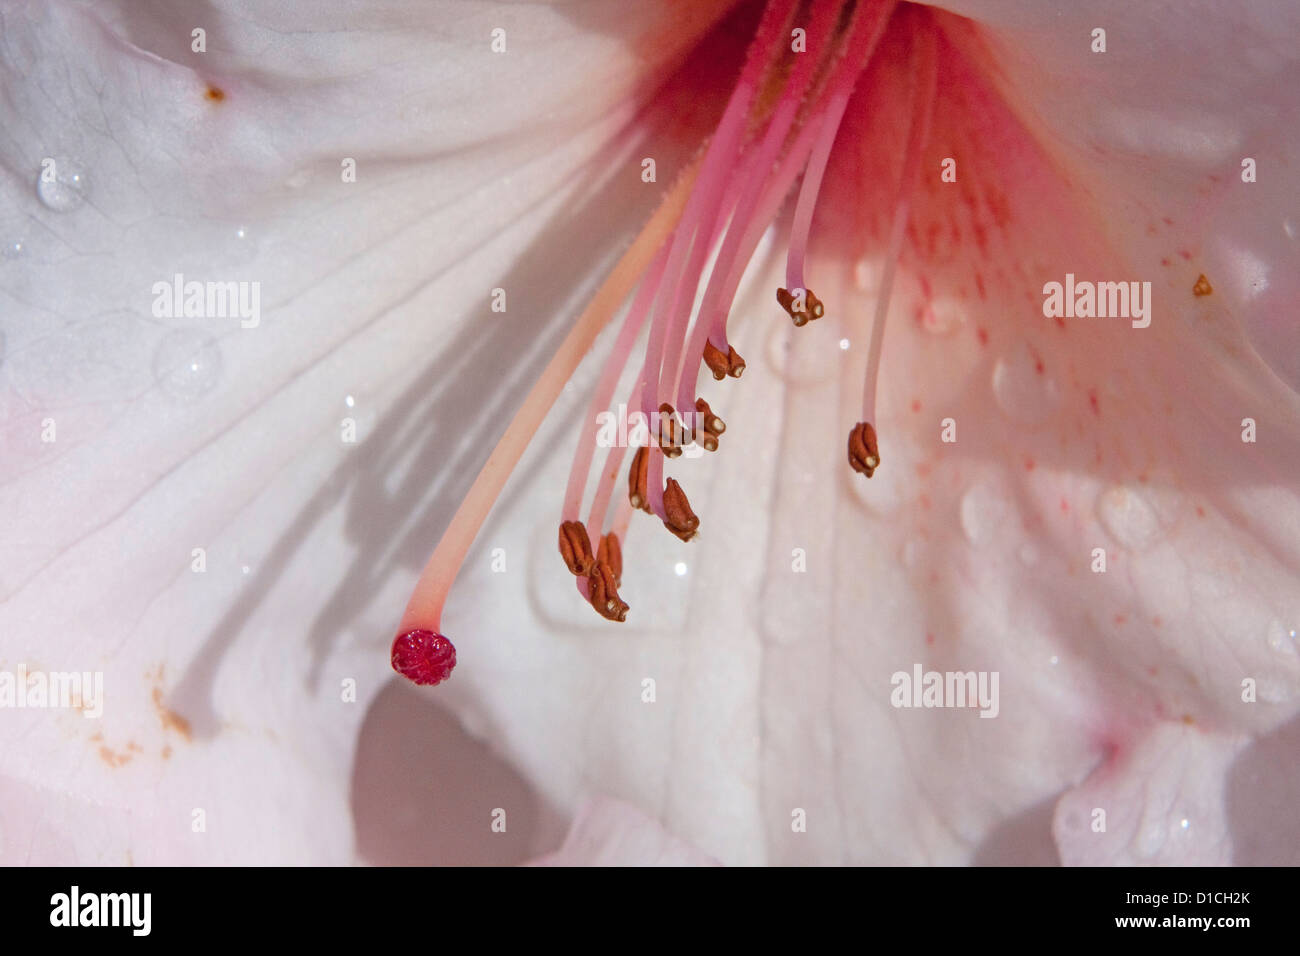 Close-up inside a pink Rhododendron flower showing petals,stamens & water droplets in Nanaimo, Vancouver Is. BC, Canada in April Stock Photo